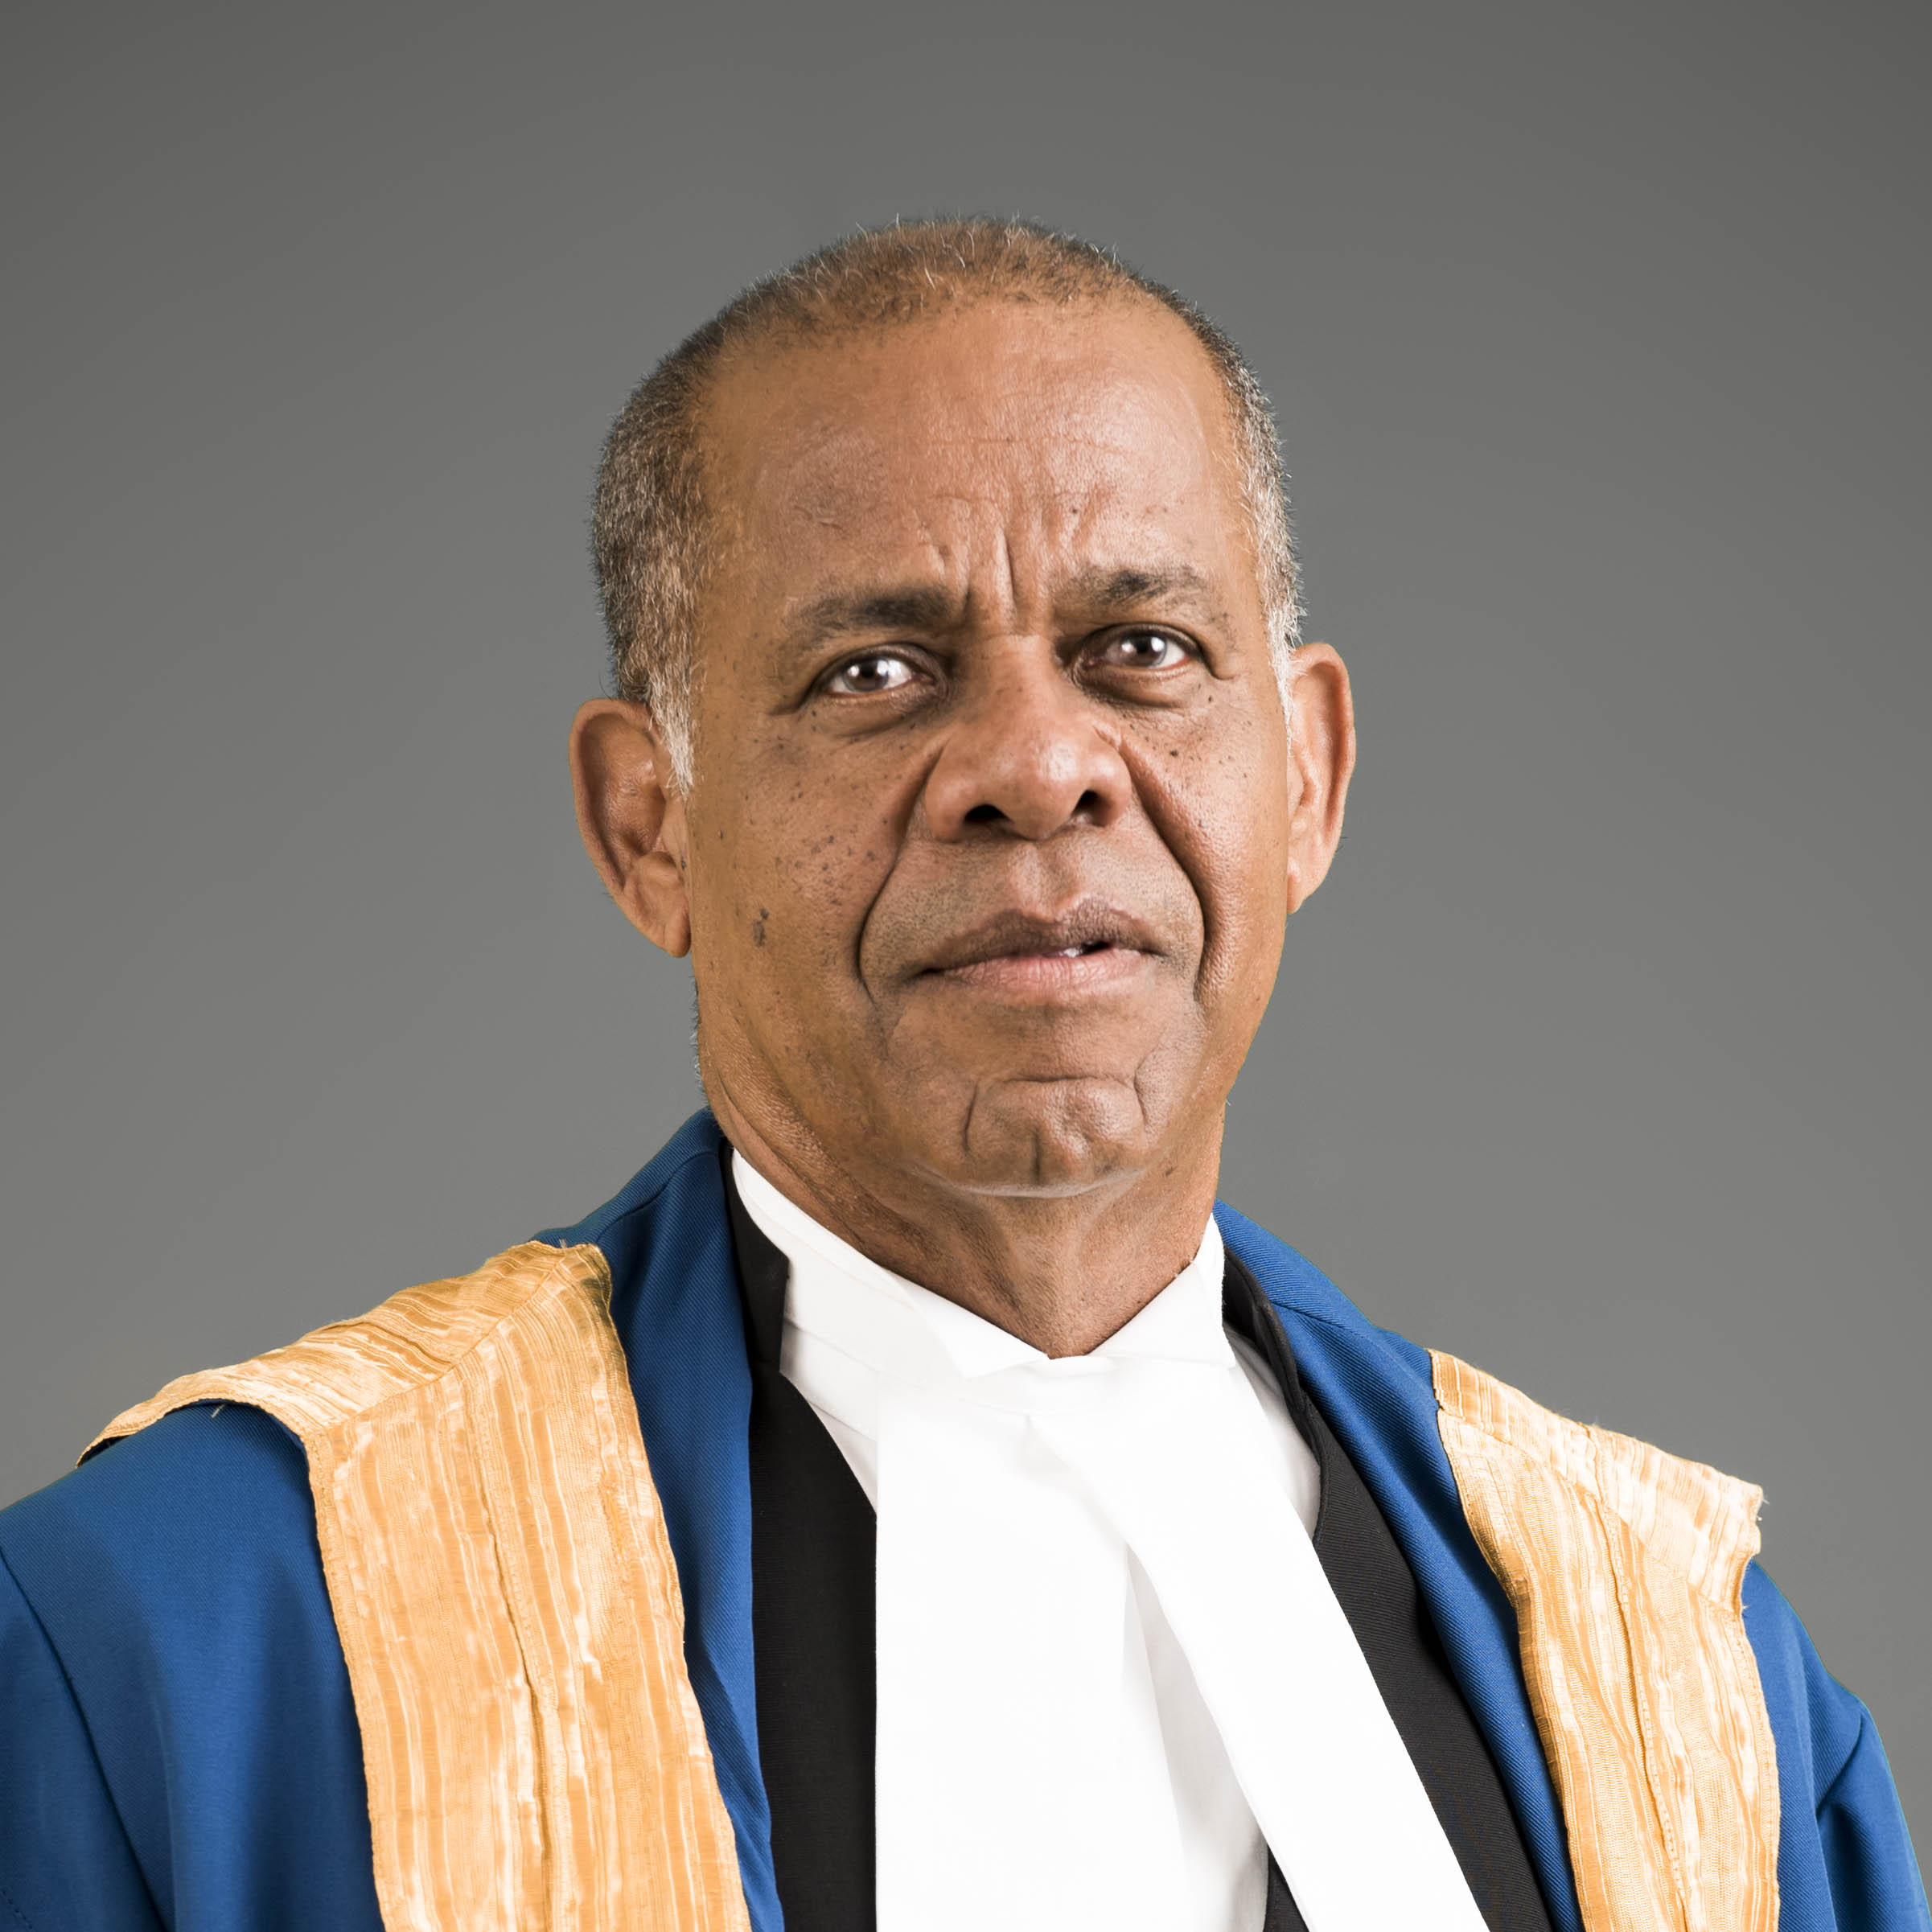 The Honourable Mr. Justice Denys Barrow